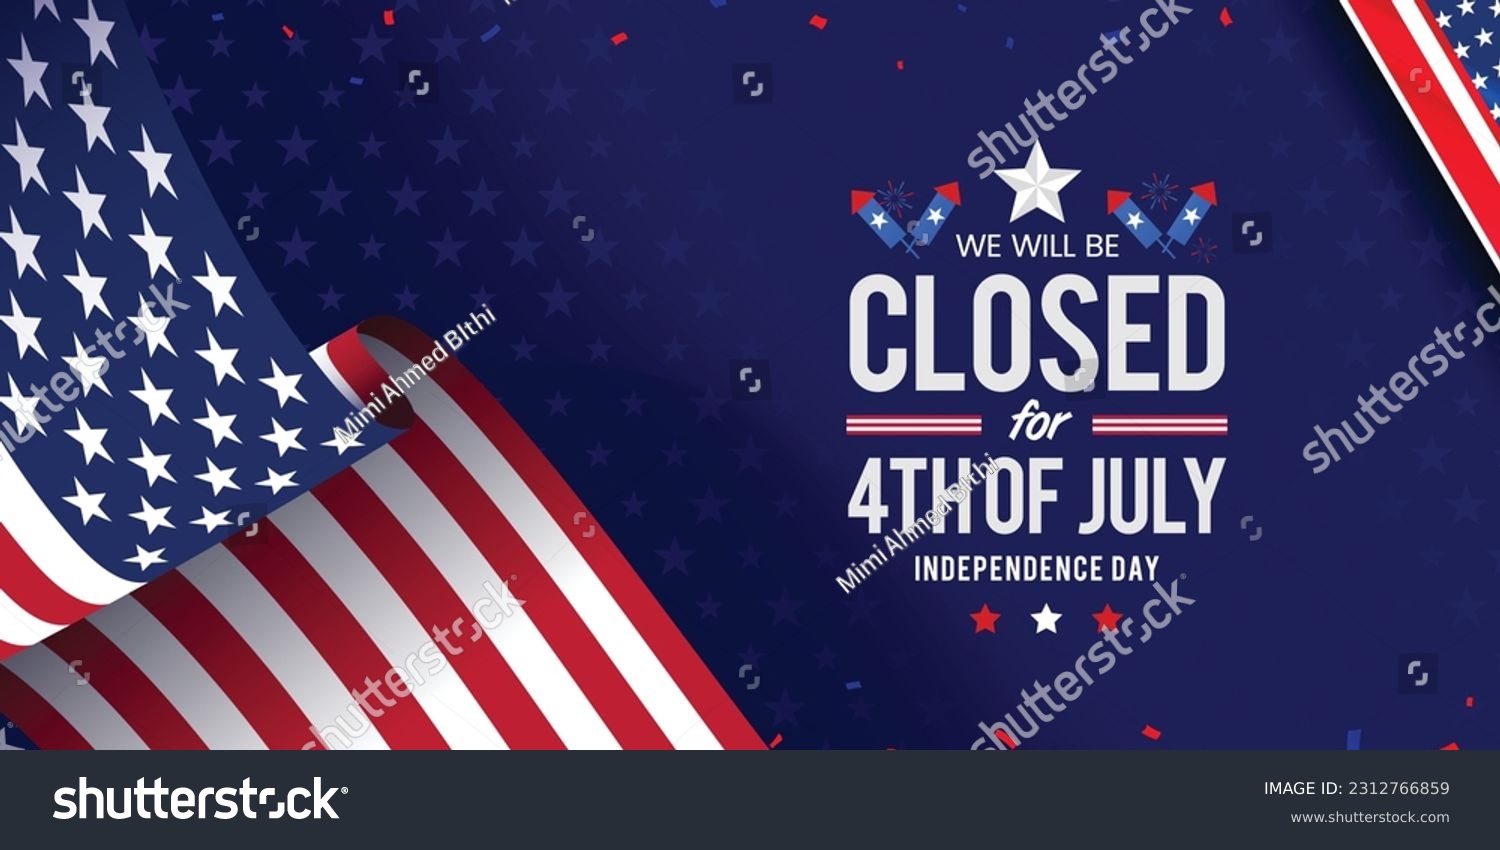 United States of America background, banner, template design for we will be closed for 4th of July independence day announcement with waving American flag. Vector illustration. #2312766859